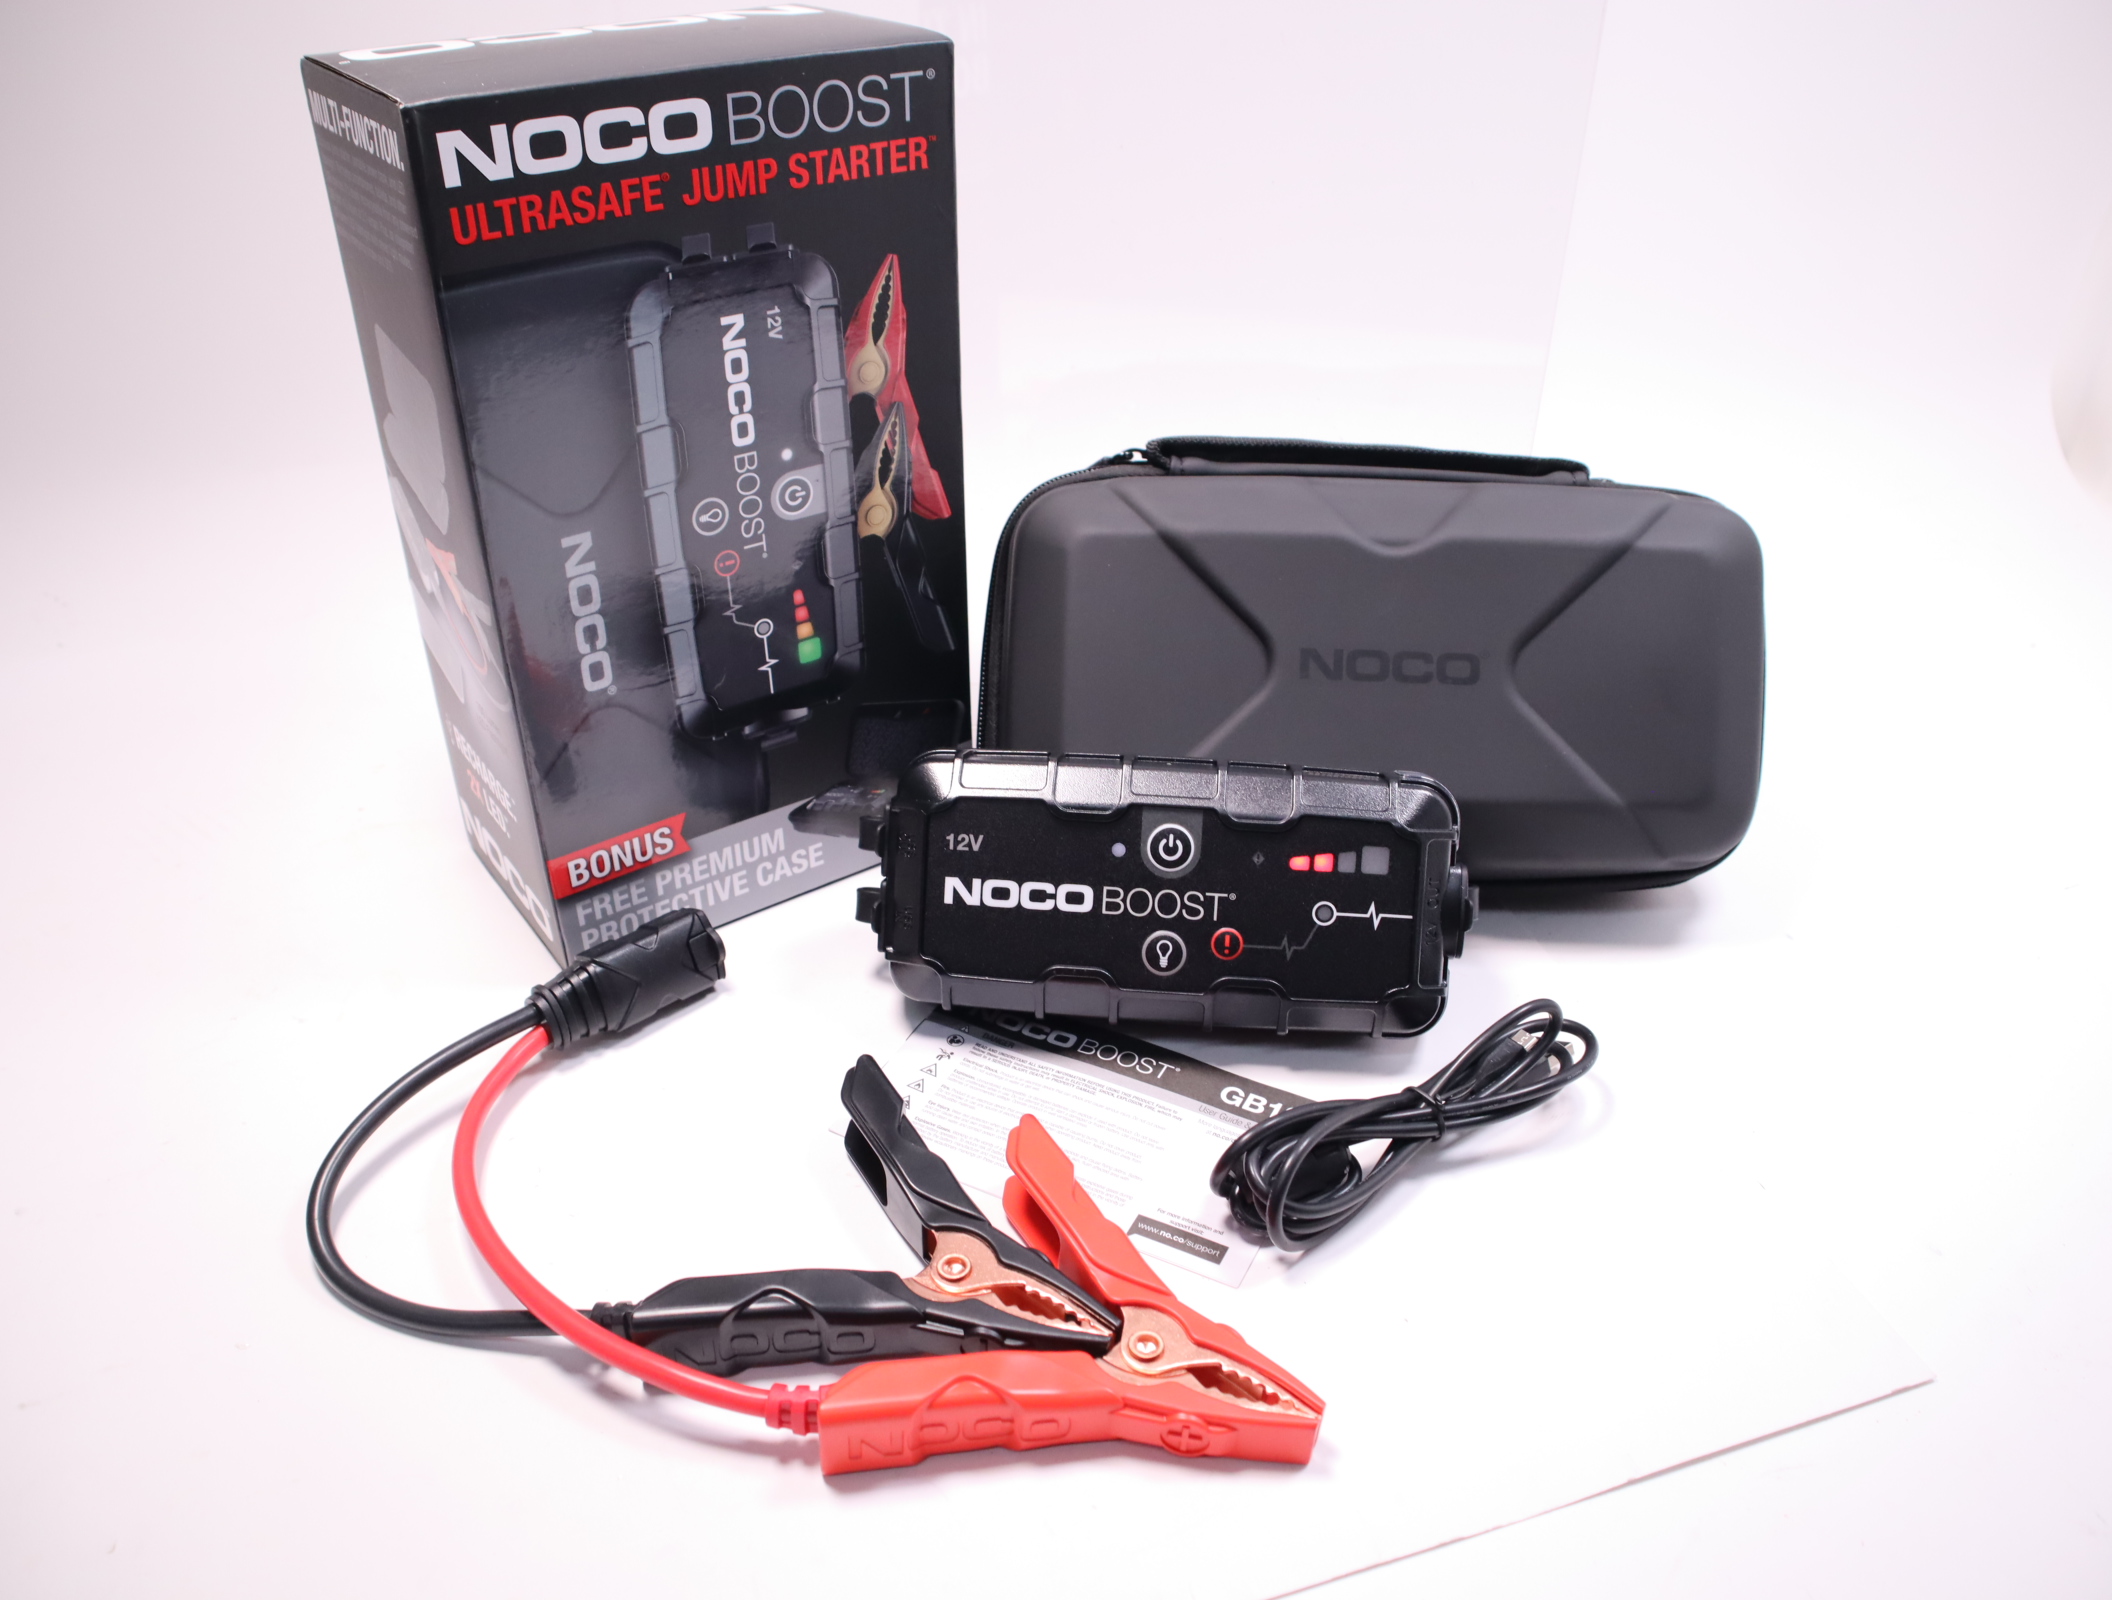 NOCO Boost GB10 Lithium Ultrasafe Jump Starter 12V Carrying Case 3234